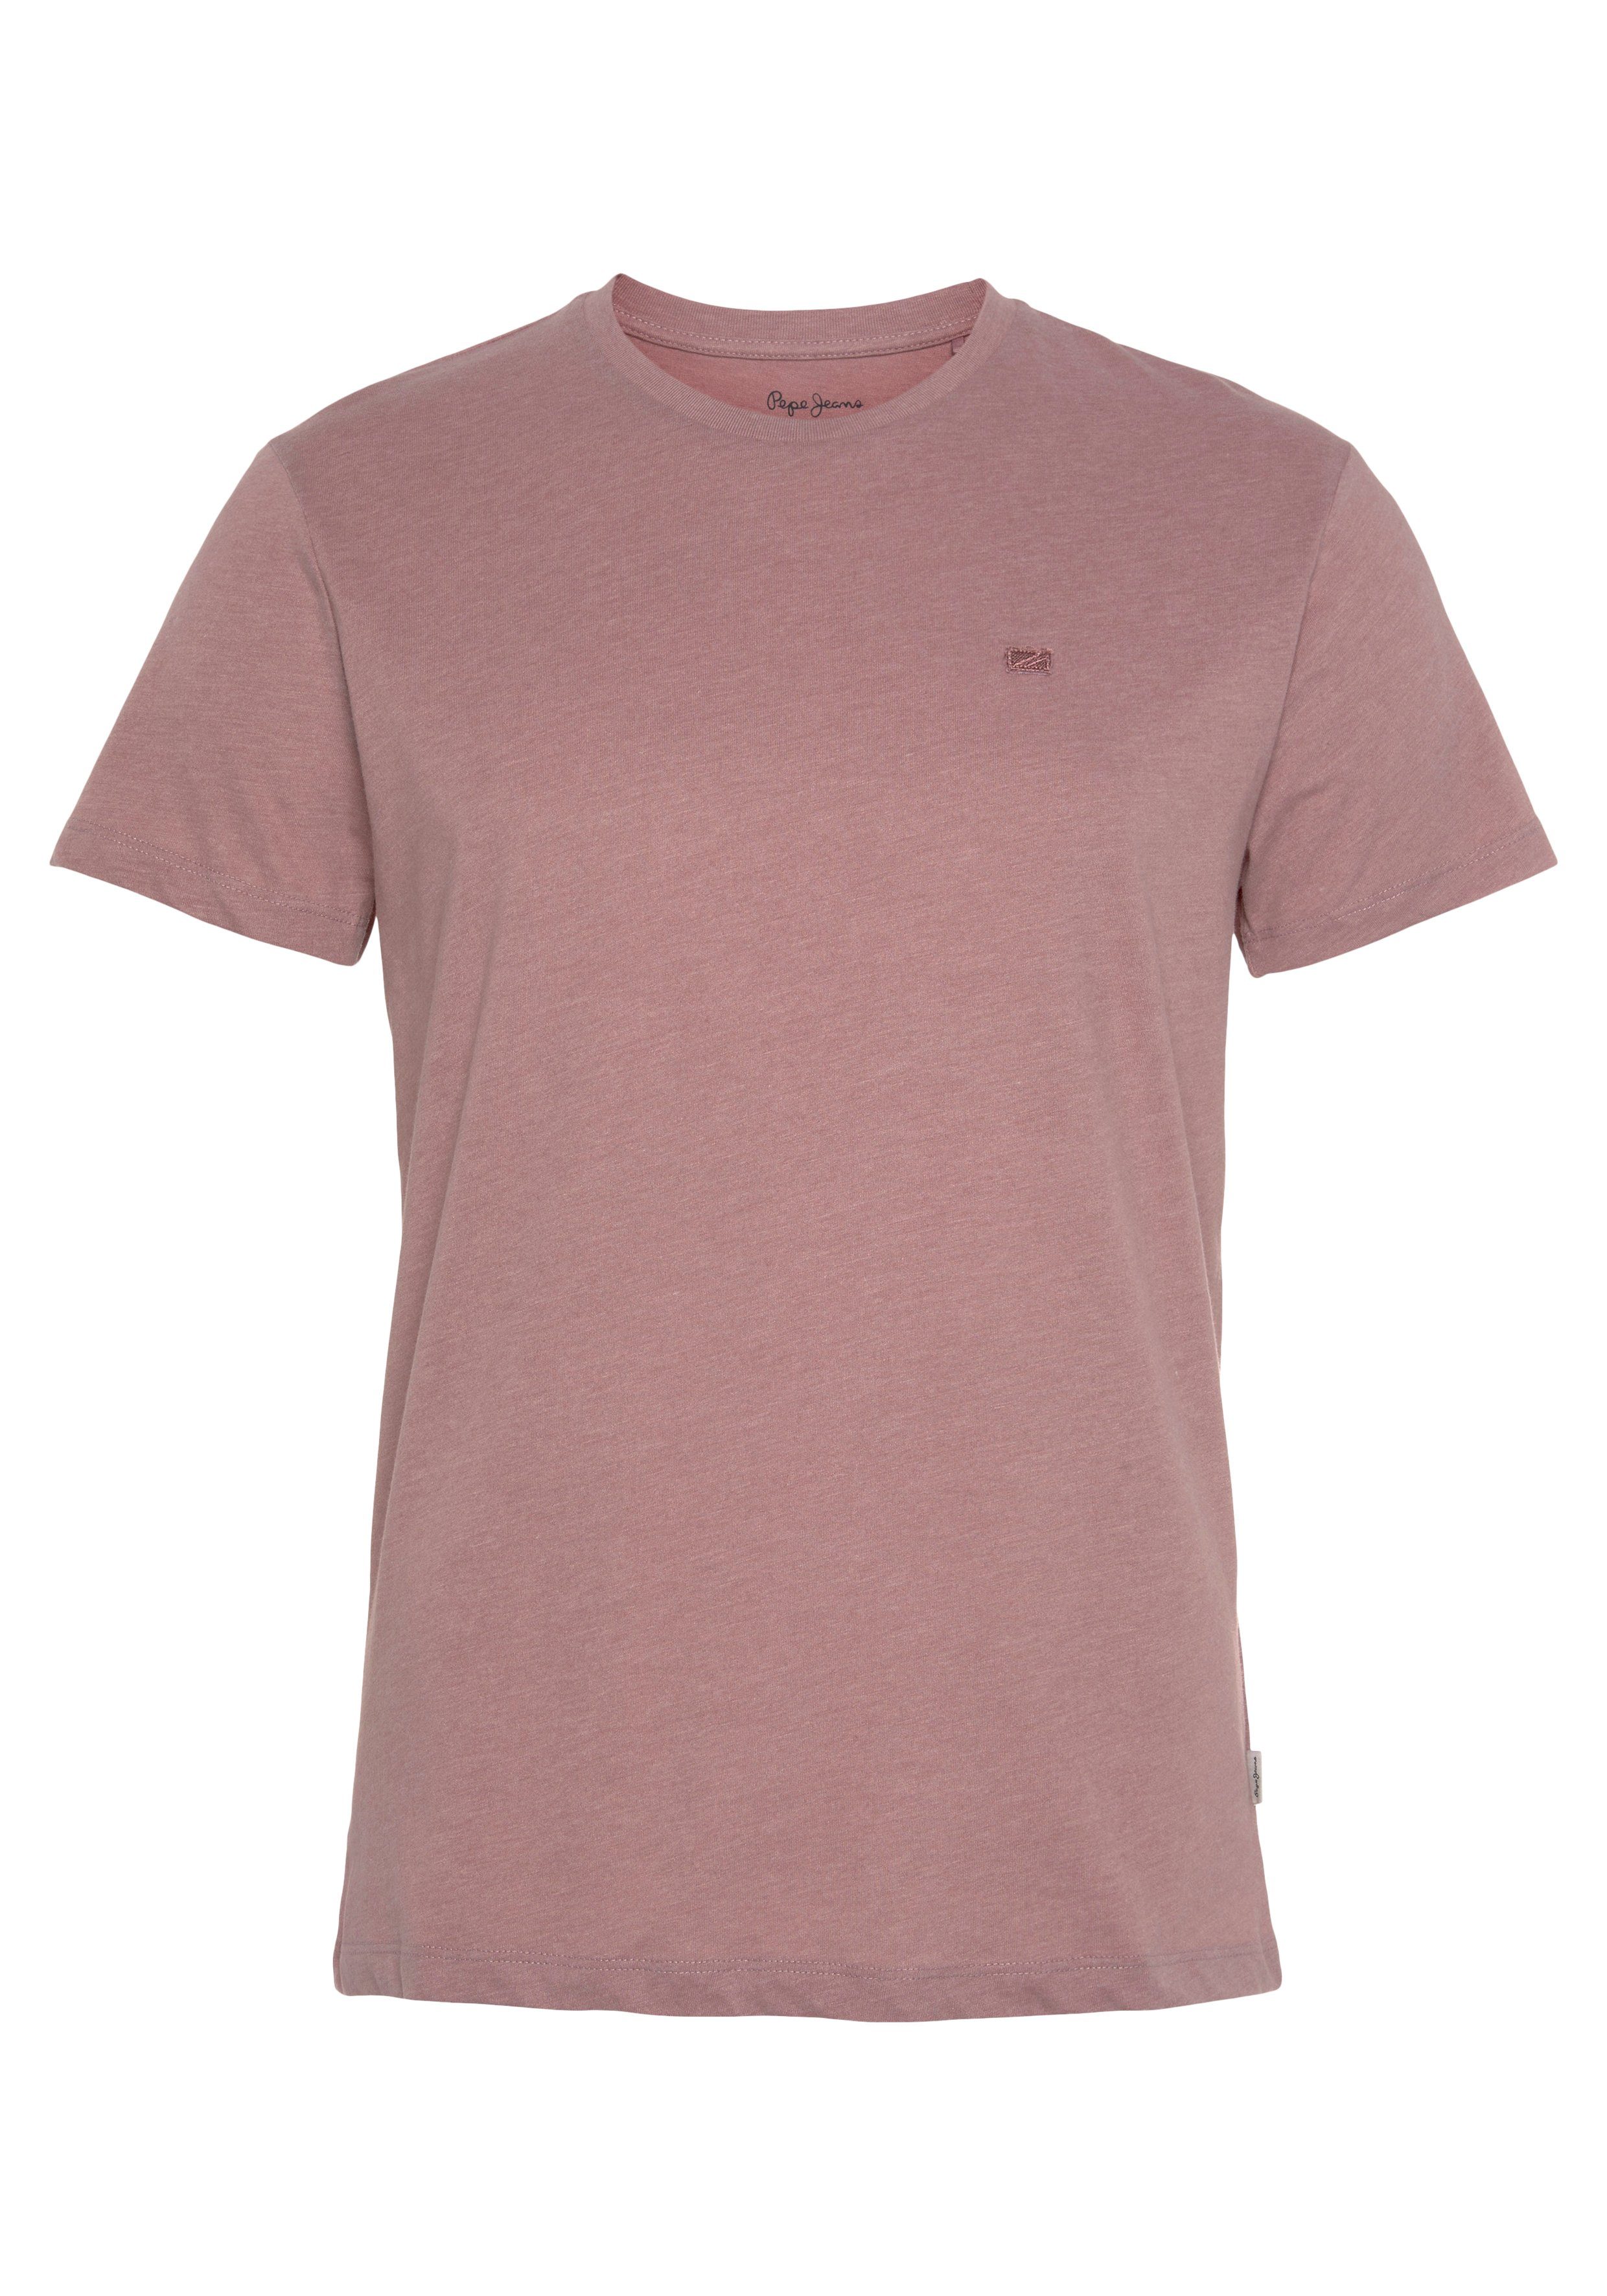 Pepe Jeans T-Shirt Cooper hellpink